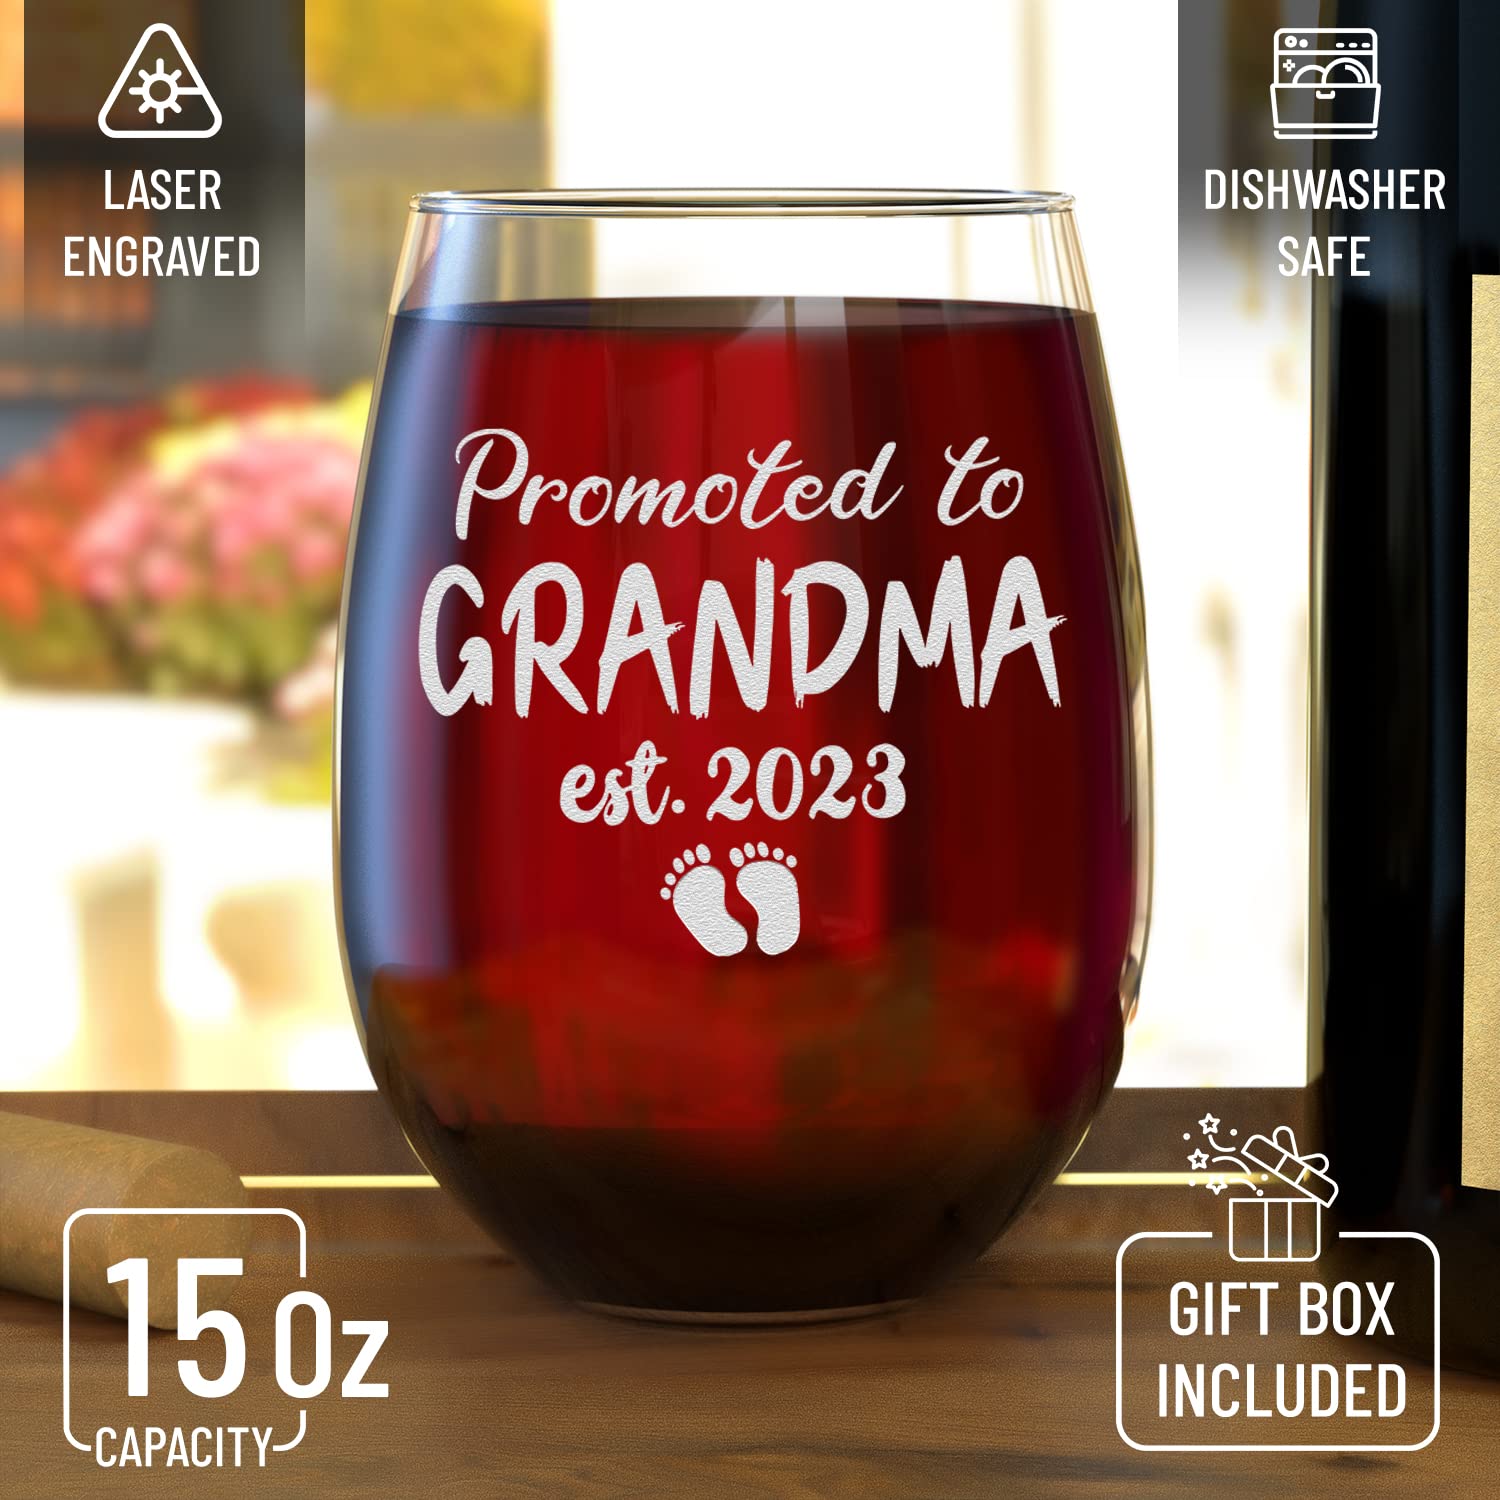 shop4ever Promoted To Grandma Est 2023 Engraved Stemless Wine Glass Gift for First Time Grandmother, New Grandma, Grandma to Be, Grammy